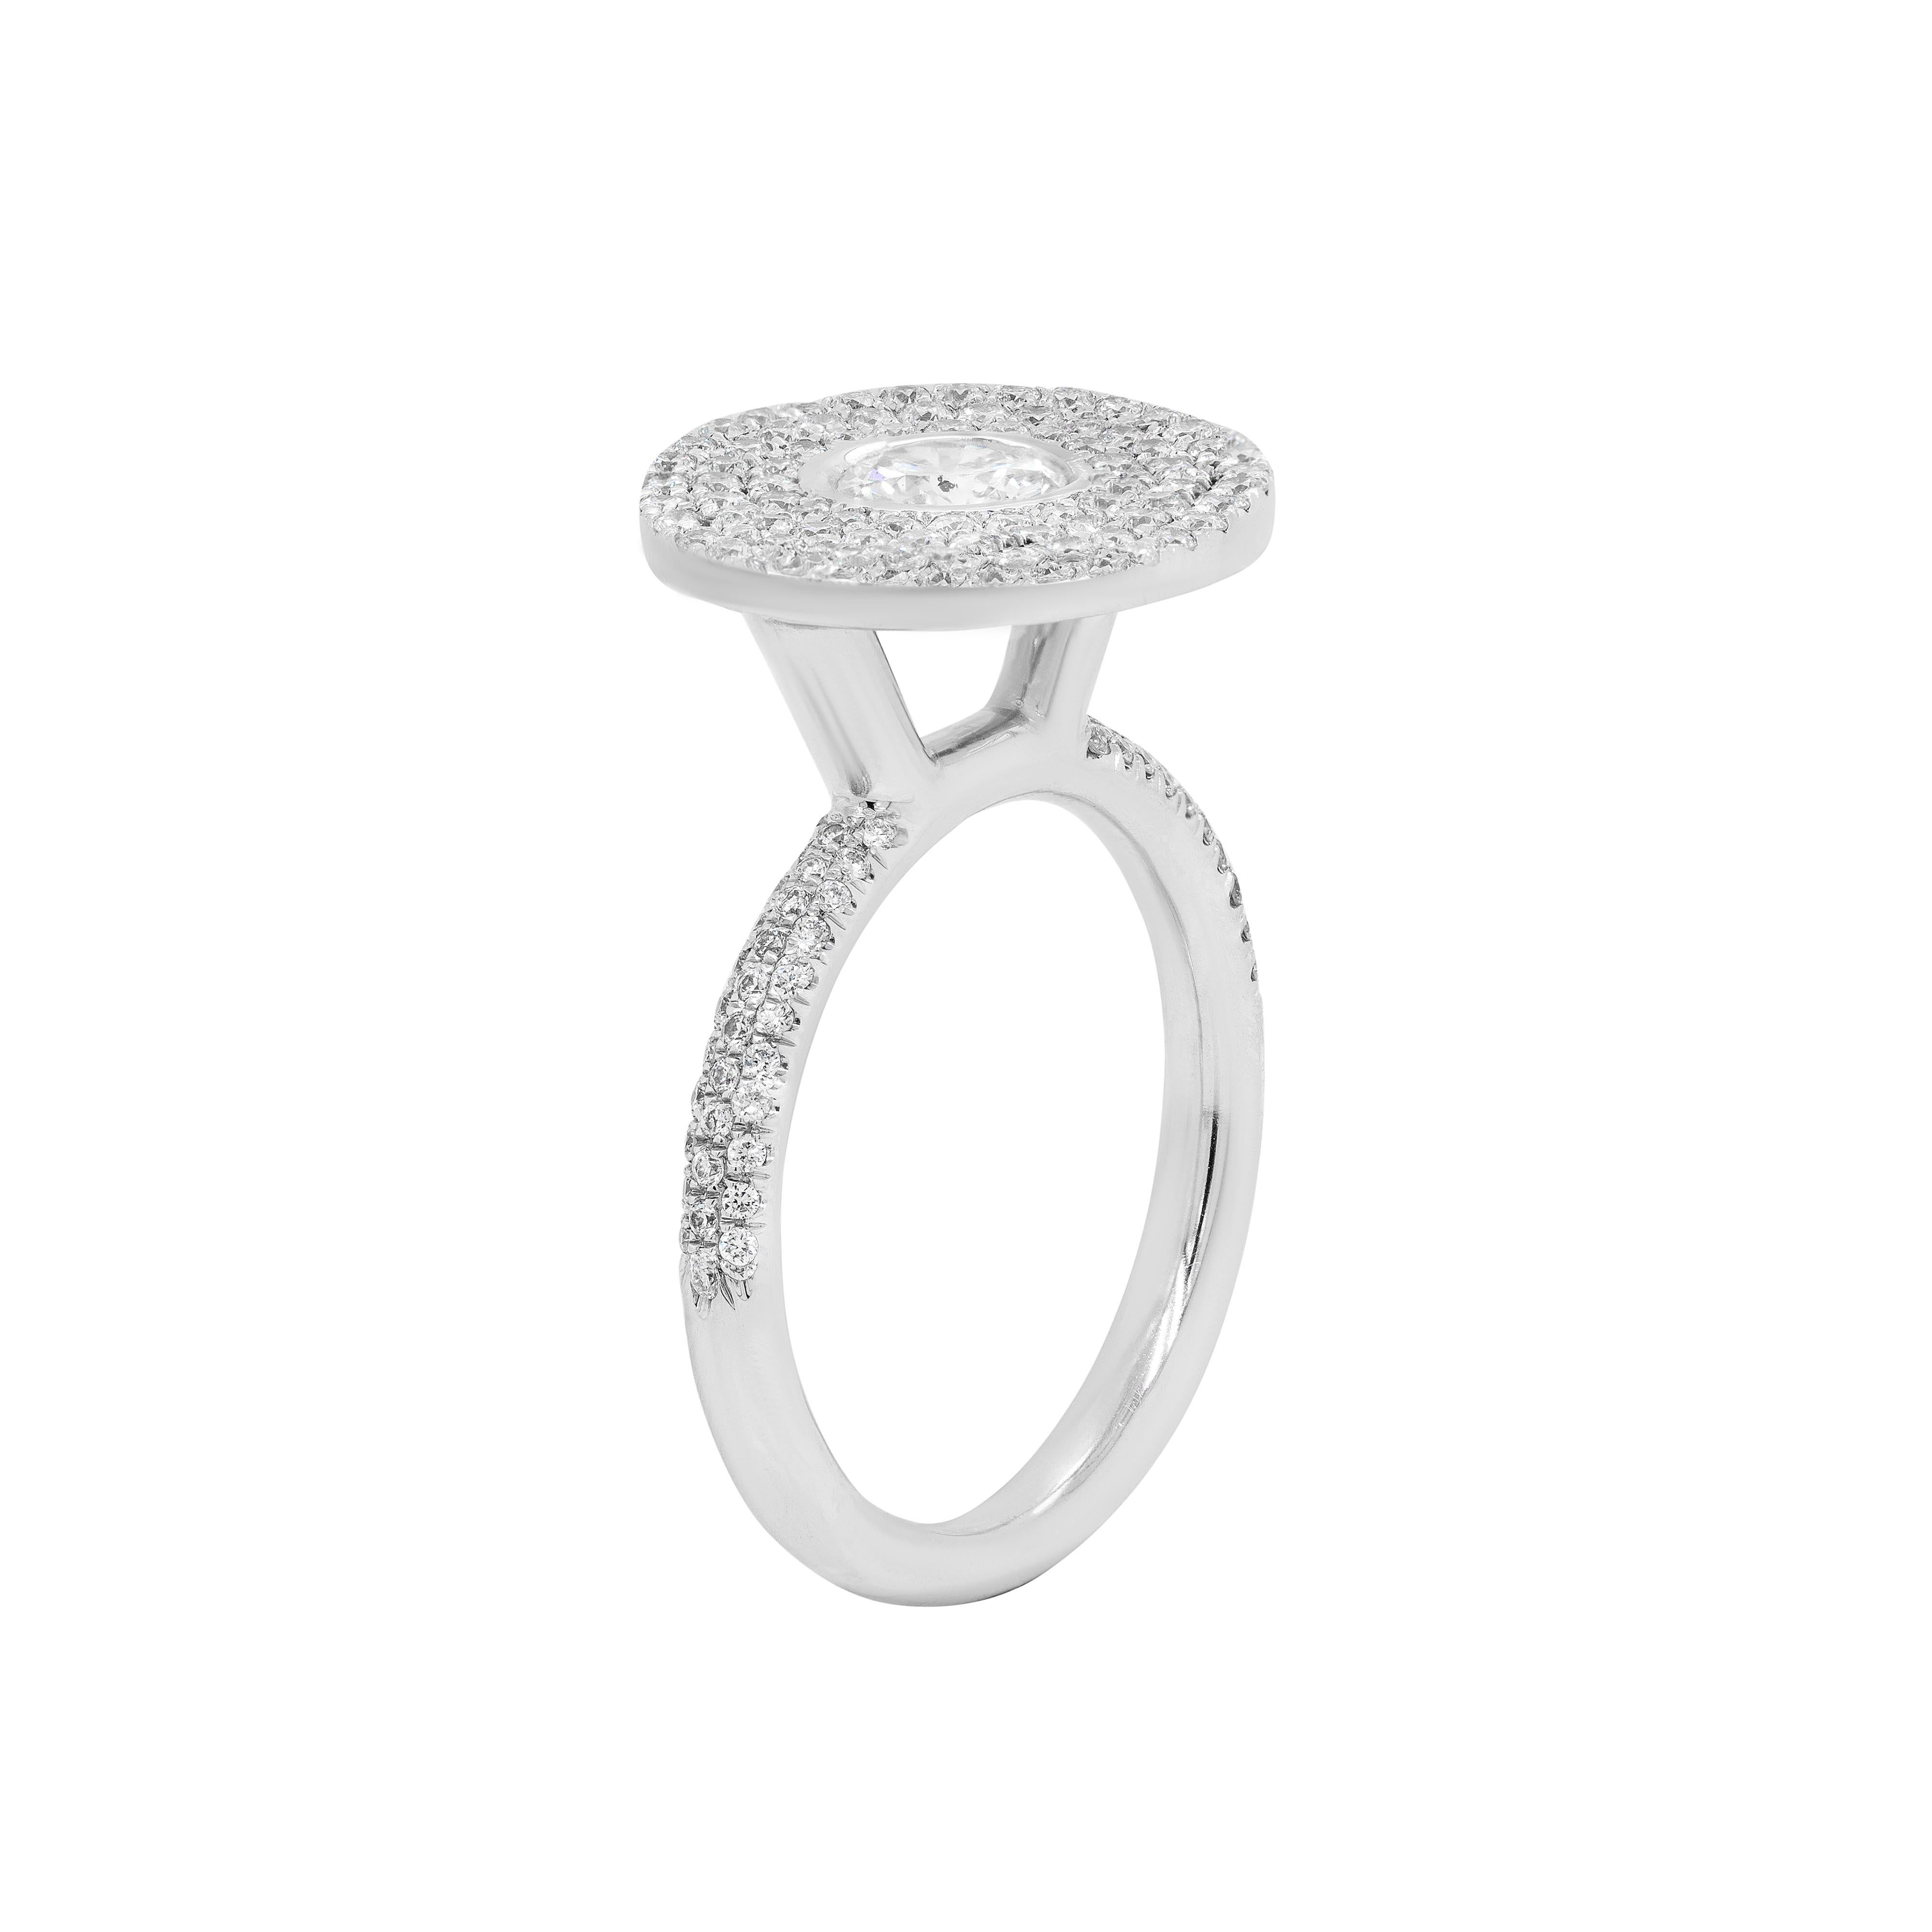 This gorgeous cocktail ring features a round brilliant cut diamond rub-over set in the centre, beautifully surrounded by three rows of smaller round brilliant cut diamonds, together completing the elegant cluster. The sparkling diamond cluster is